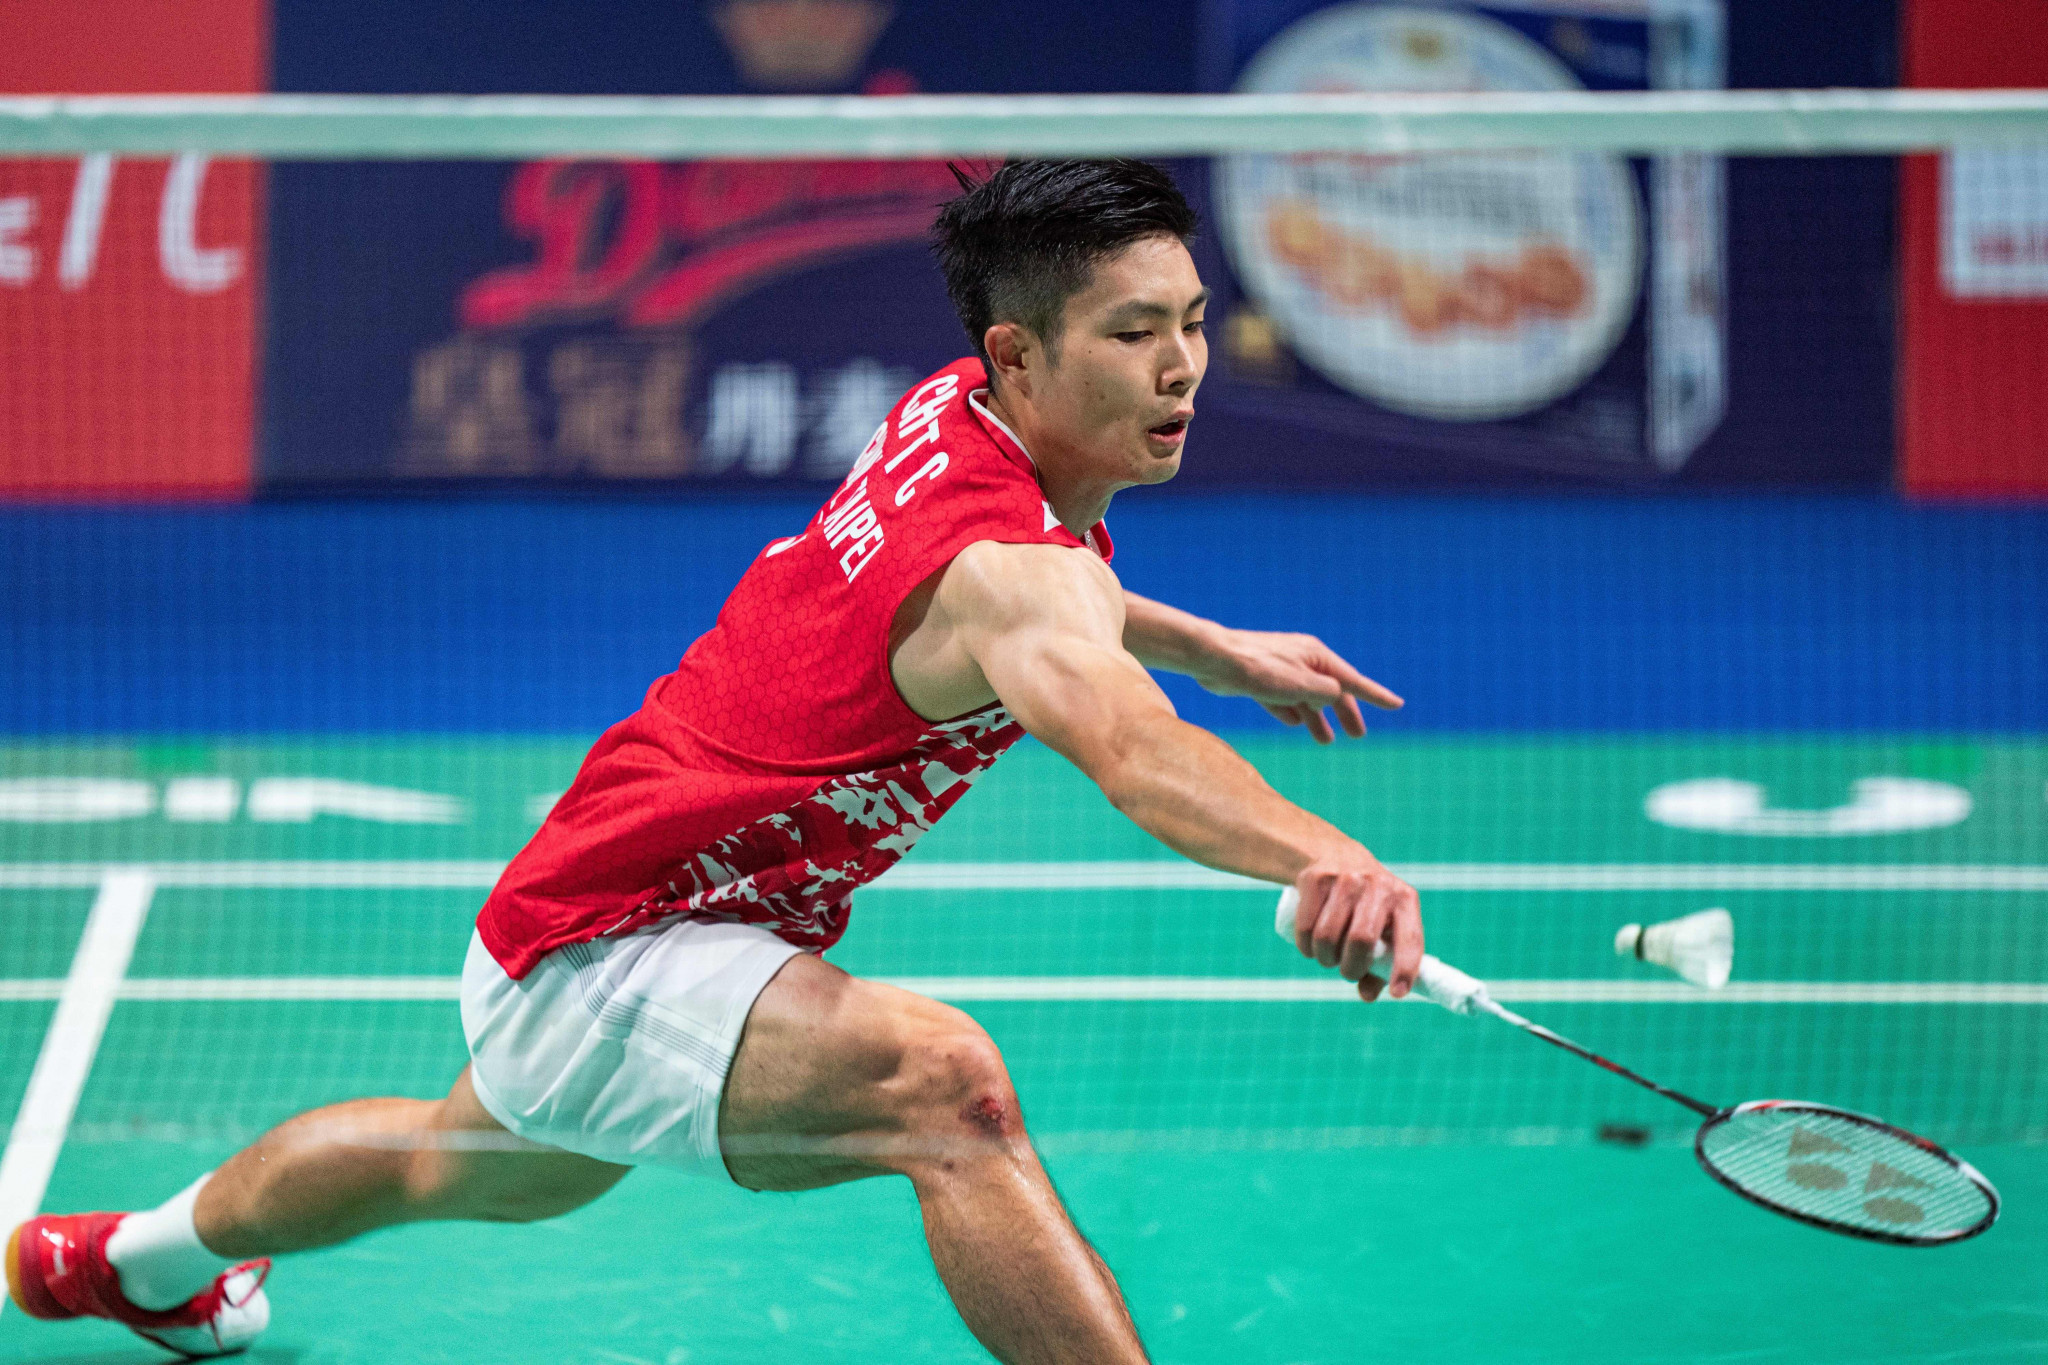 Chou Tien Chen won a tight match against India’s Srikanth Kidambi to reach the last four ©Getty Images